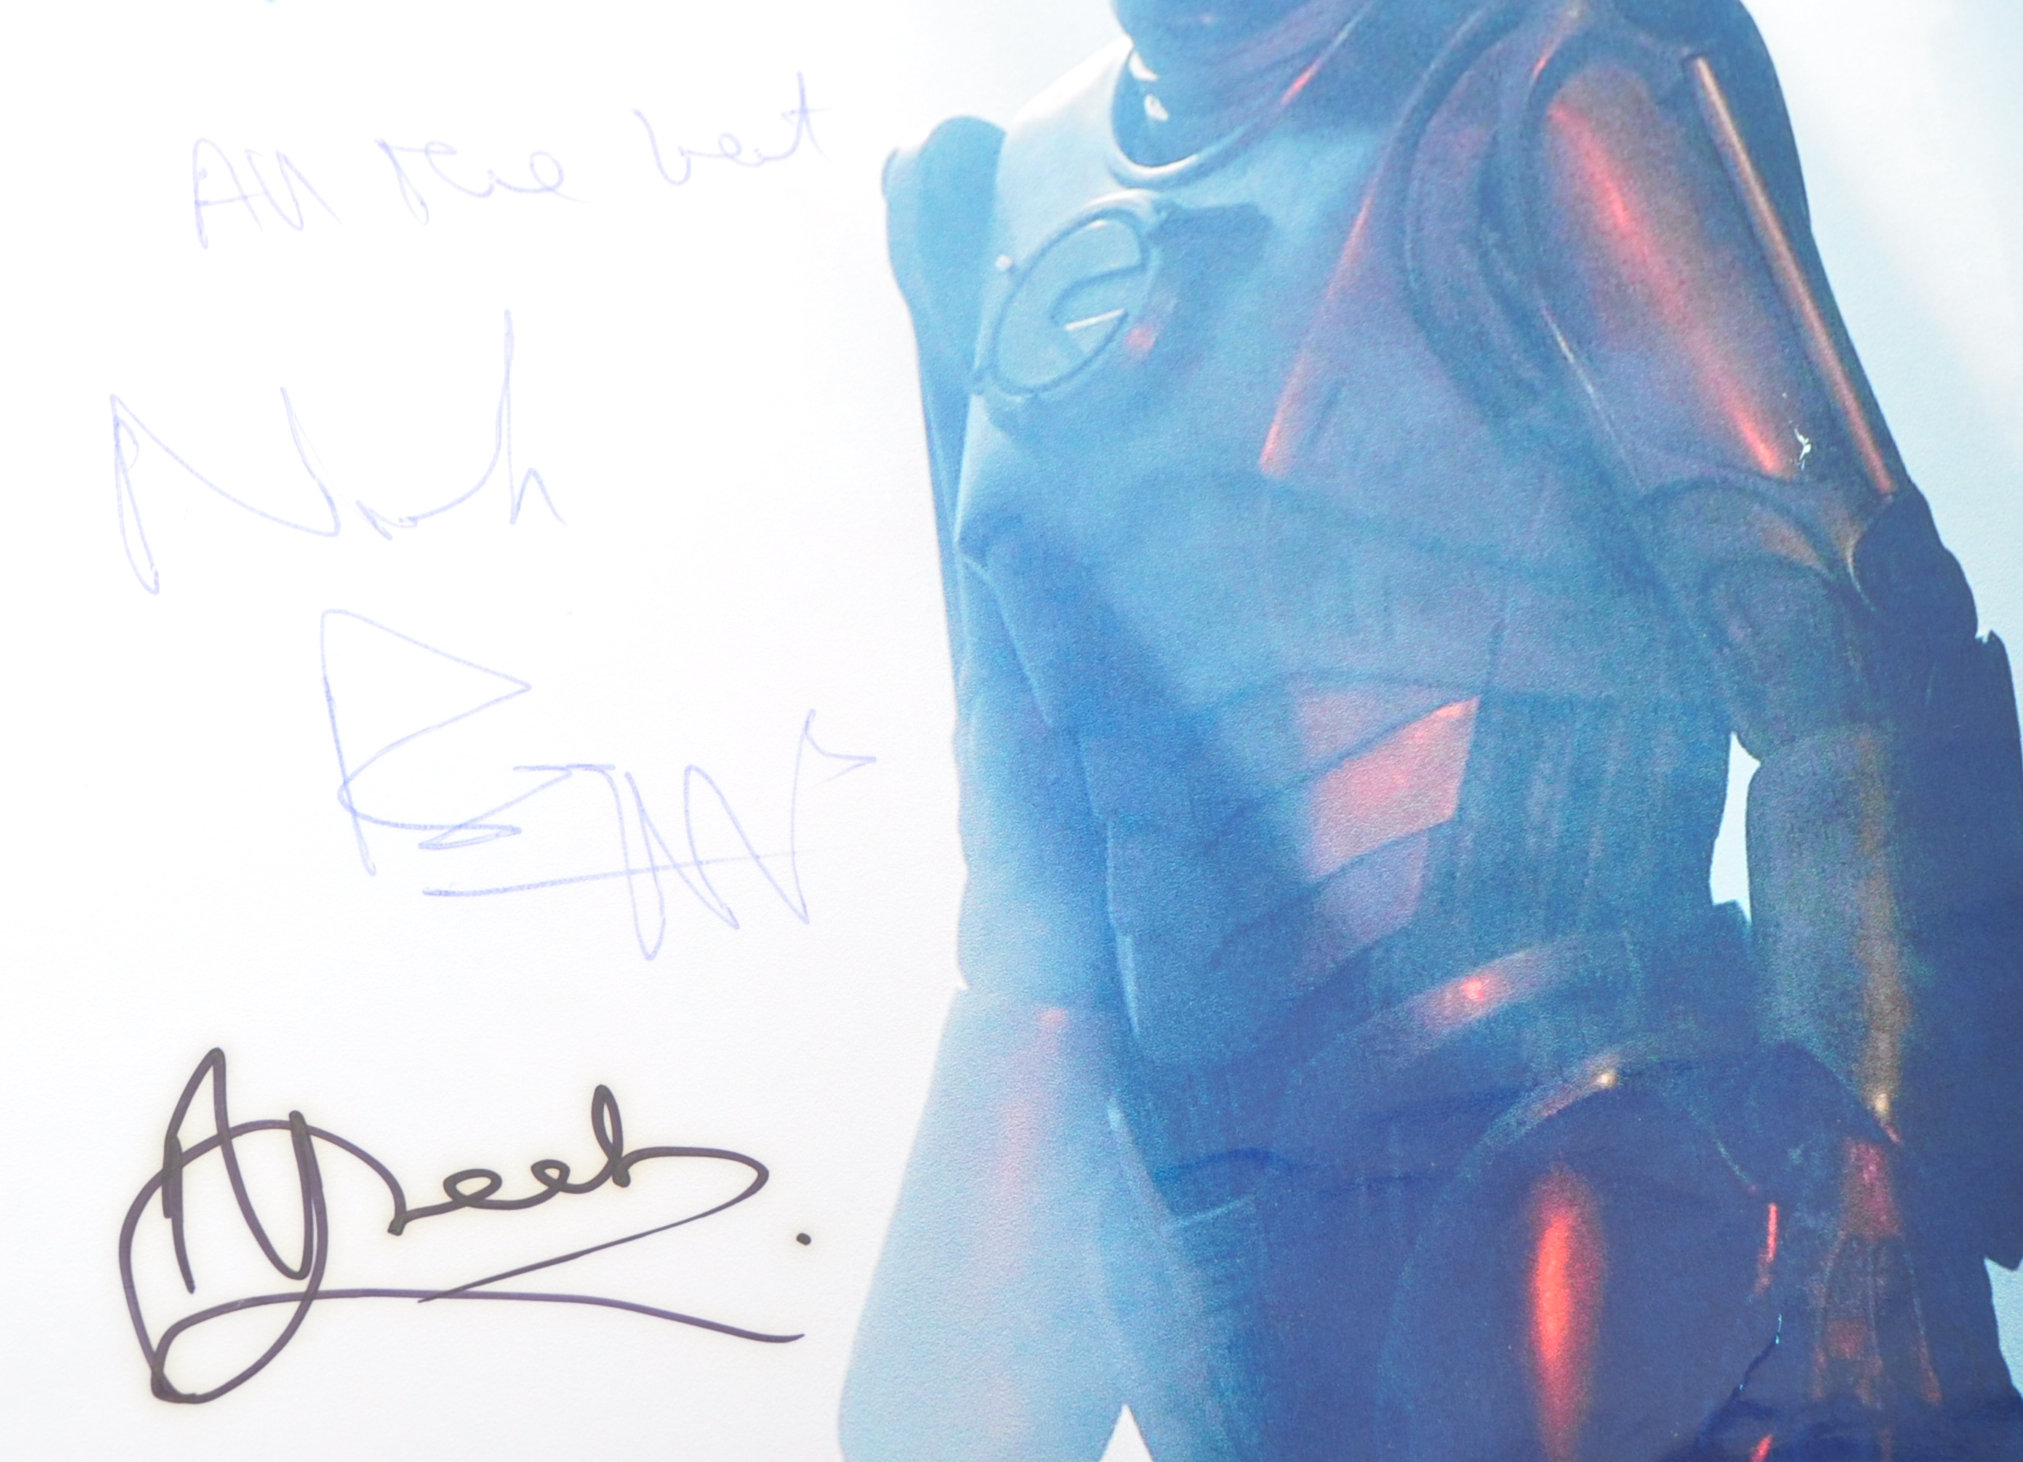 DOCTOR WHO - DAVID TENNANT ERA - AUTOGRAPH COLLECTION - Image 13 of 15